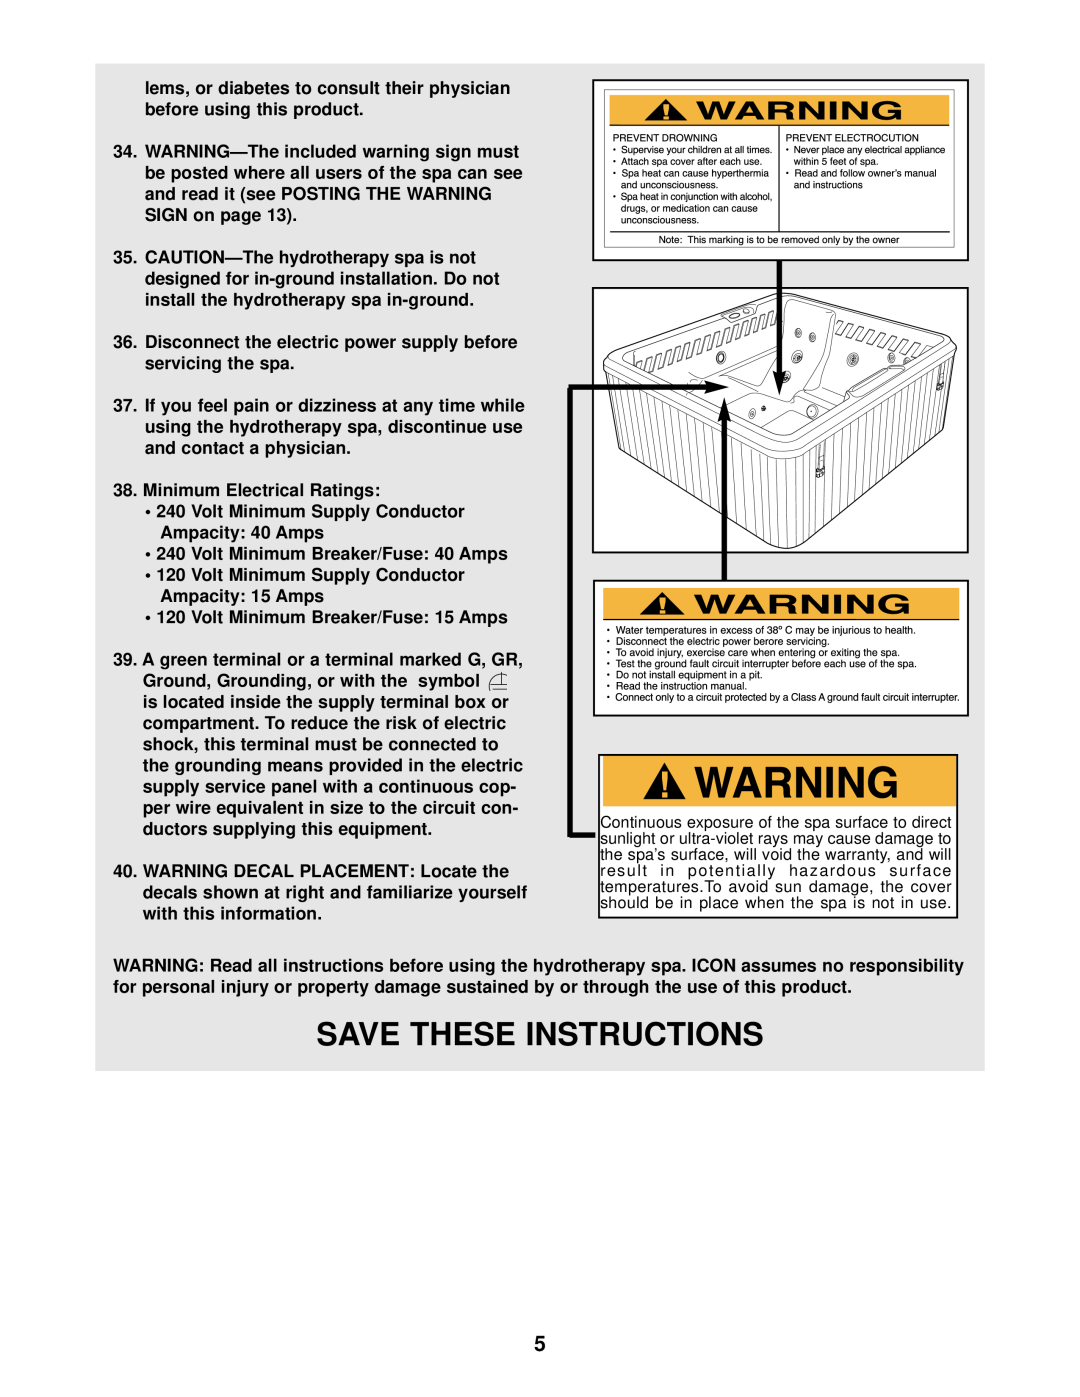 Inter-Tel 831.10507 Save These Instructions, CAUTION-The hydrotherapy spa is not, Volt Minimum Breaker/Fuse 40 Amps 